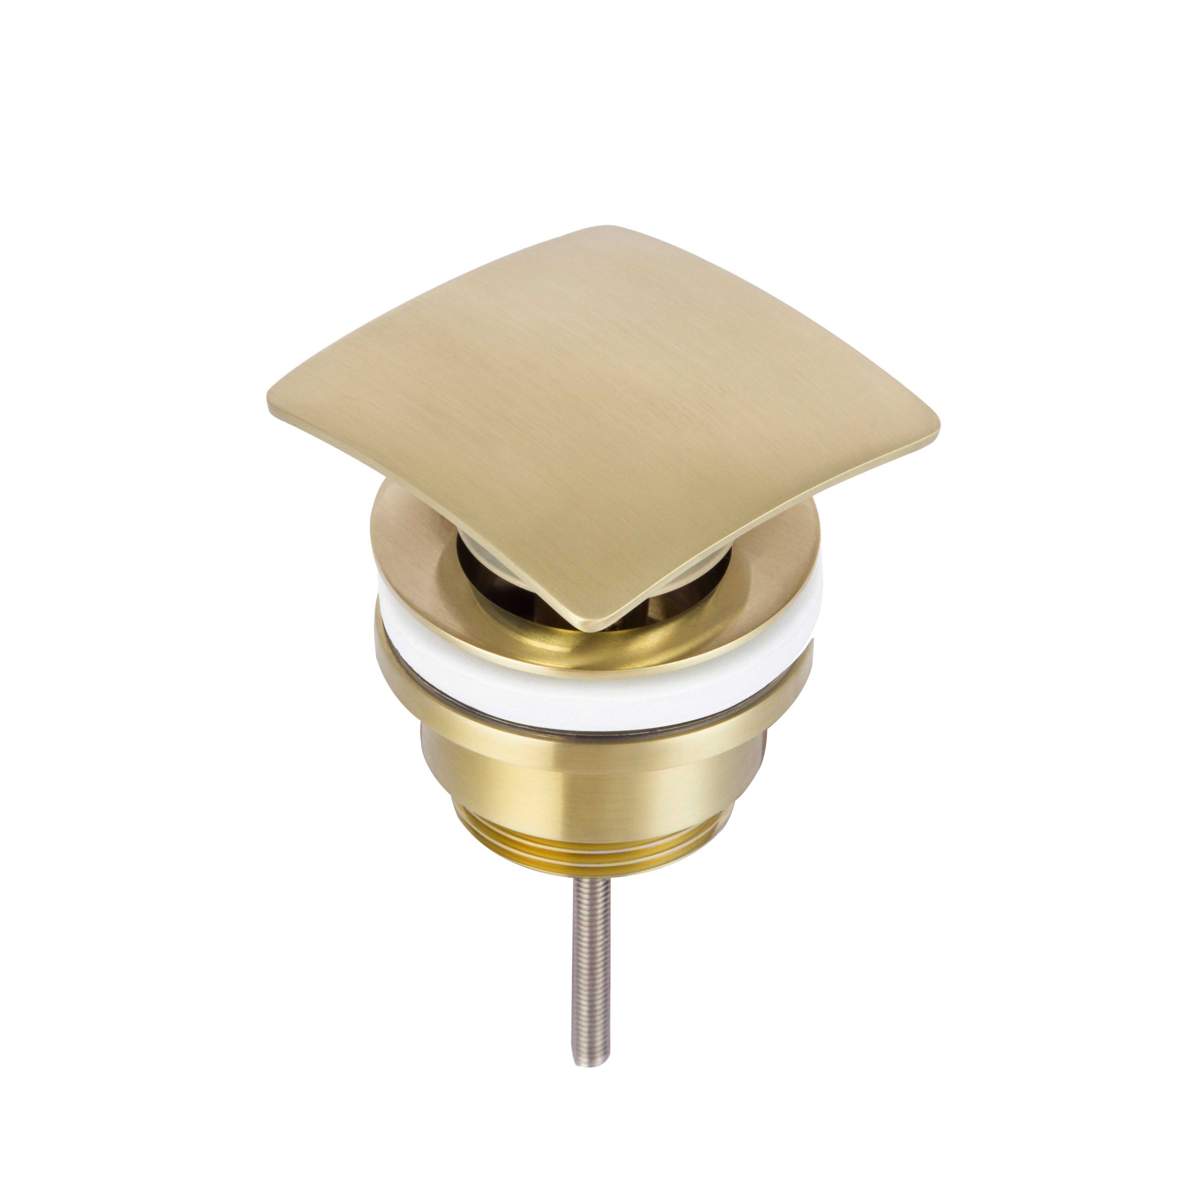 JTP Hix Brushed Brass Universal Slotted and Unslotted Basin Waste (33709SUNBBR)